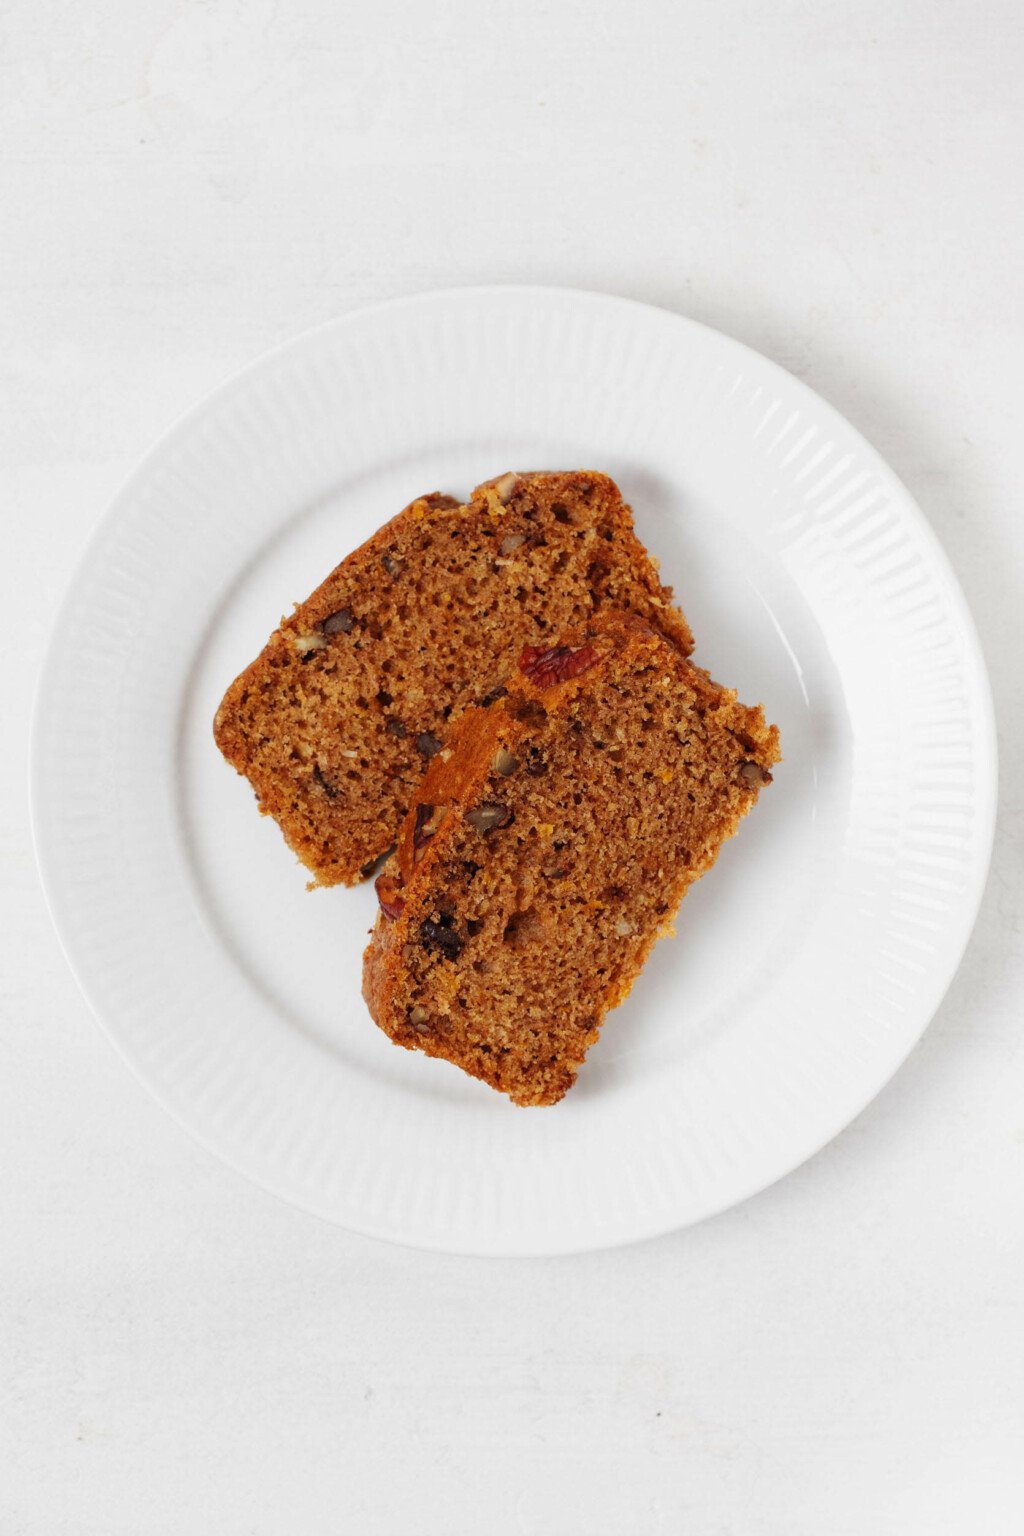 Two slices of vegan spiced pecan citrus loaf are resting on a round, white plate.